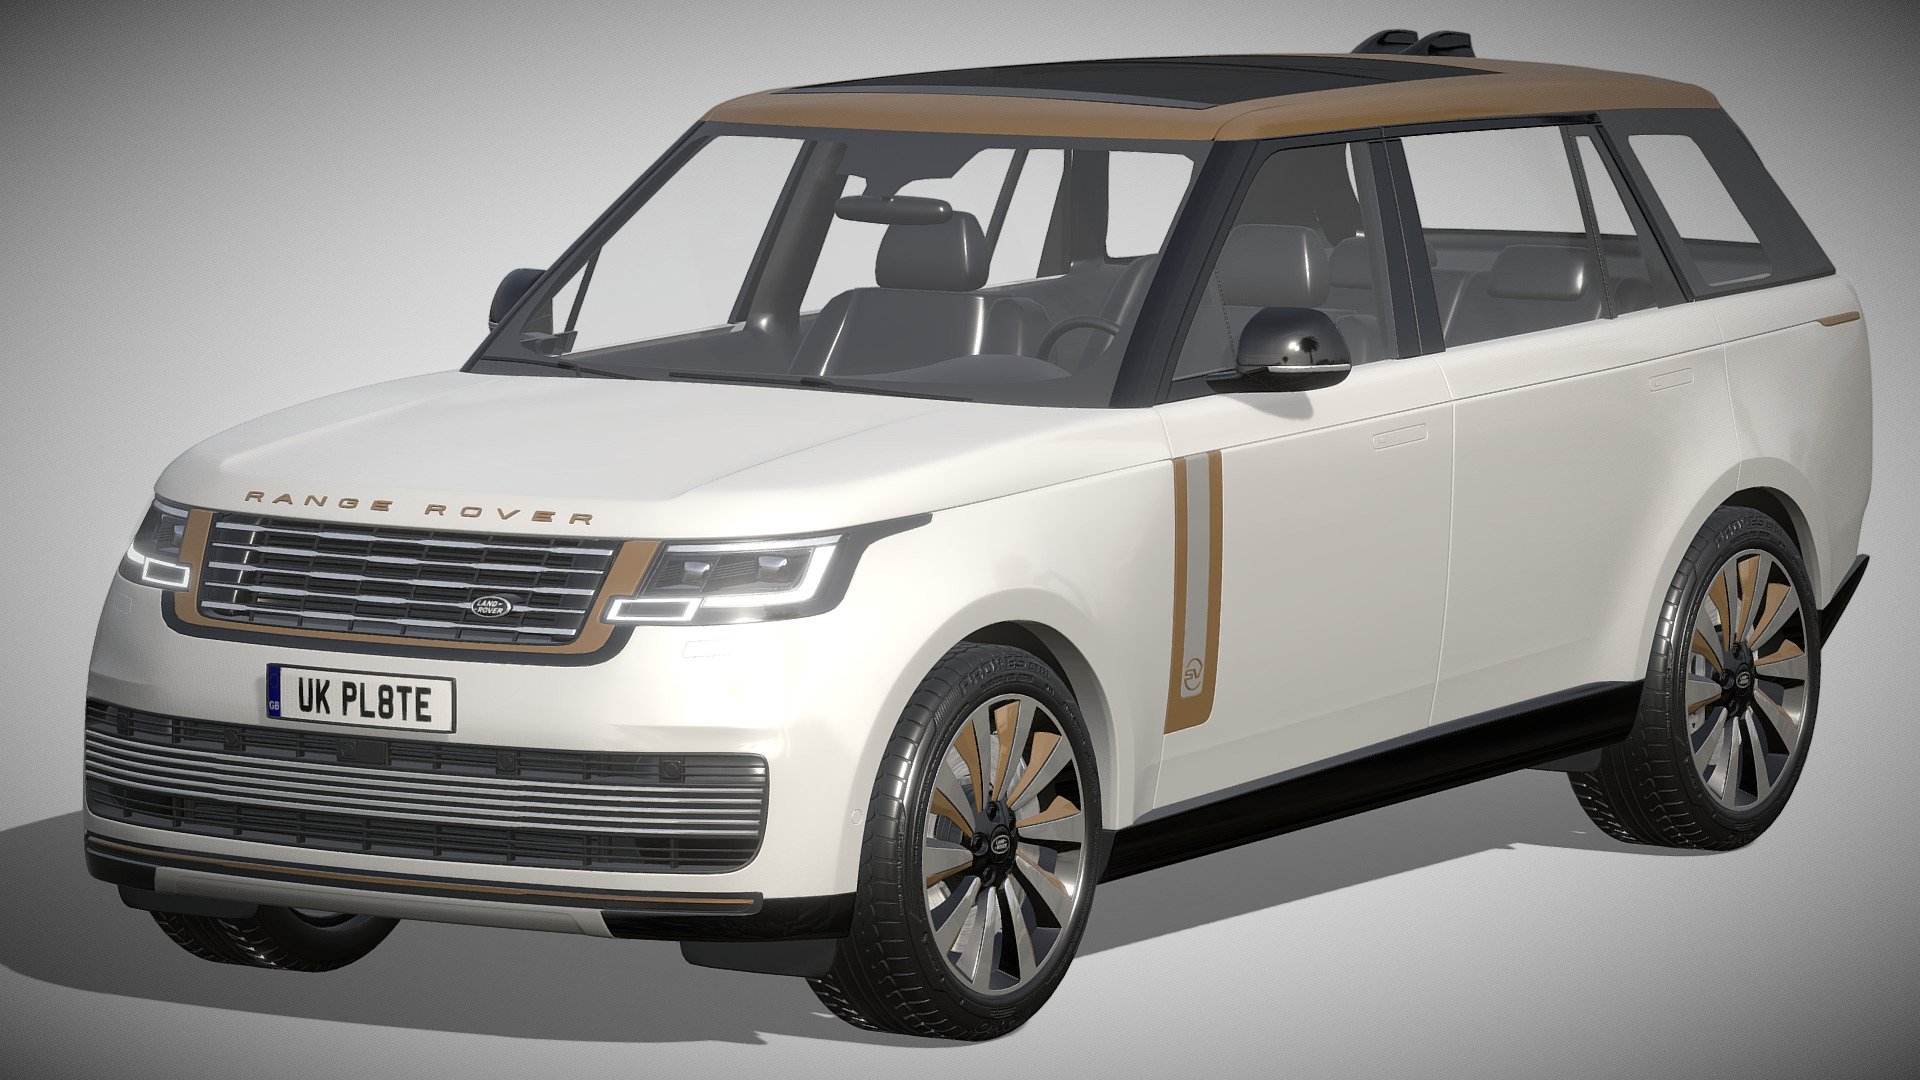 Land Rover Range Rover SV LWB Serenity 2022

https://www.landrover.com/vehicles/new-range-rover/sv.html

Clean geometry Light weight model, yet completely detailed for HI-Res renders. Use for movies, Advertisements or games

Corona render and materials

All textures include in *.rar files

Lighting setup is not included in the file! - Land Rover Range Rover SV LWB Serenity 2022 - Buy Royalty Free 3D model by zifir3d 3d model